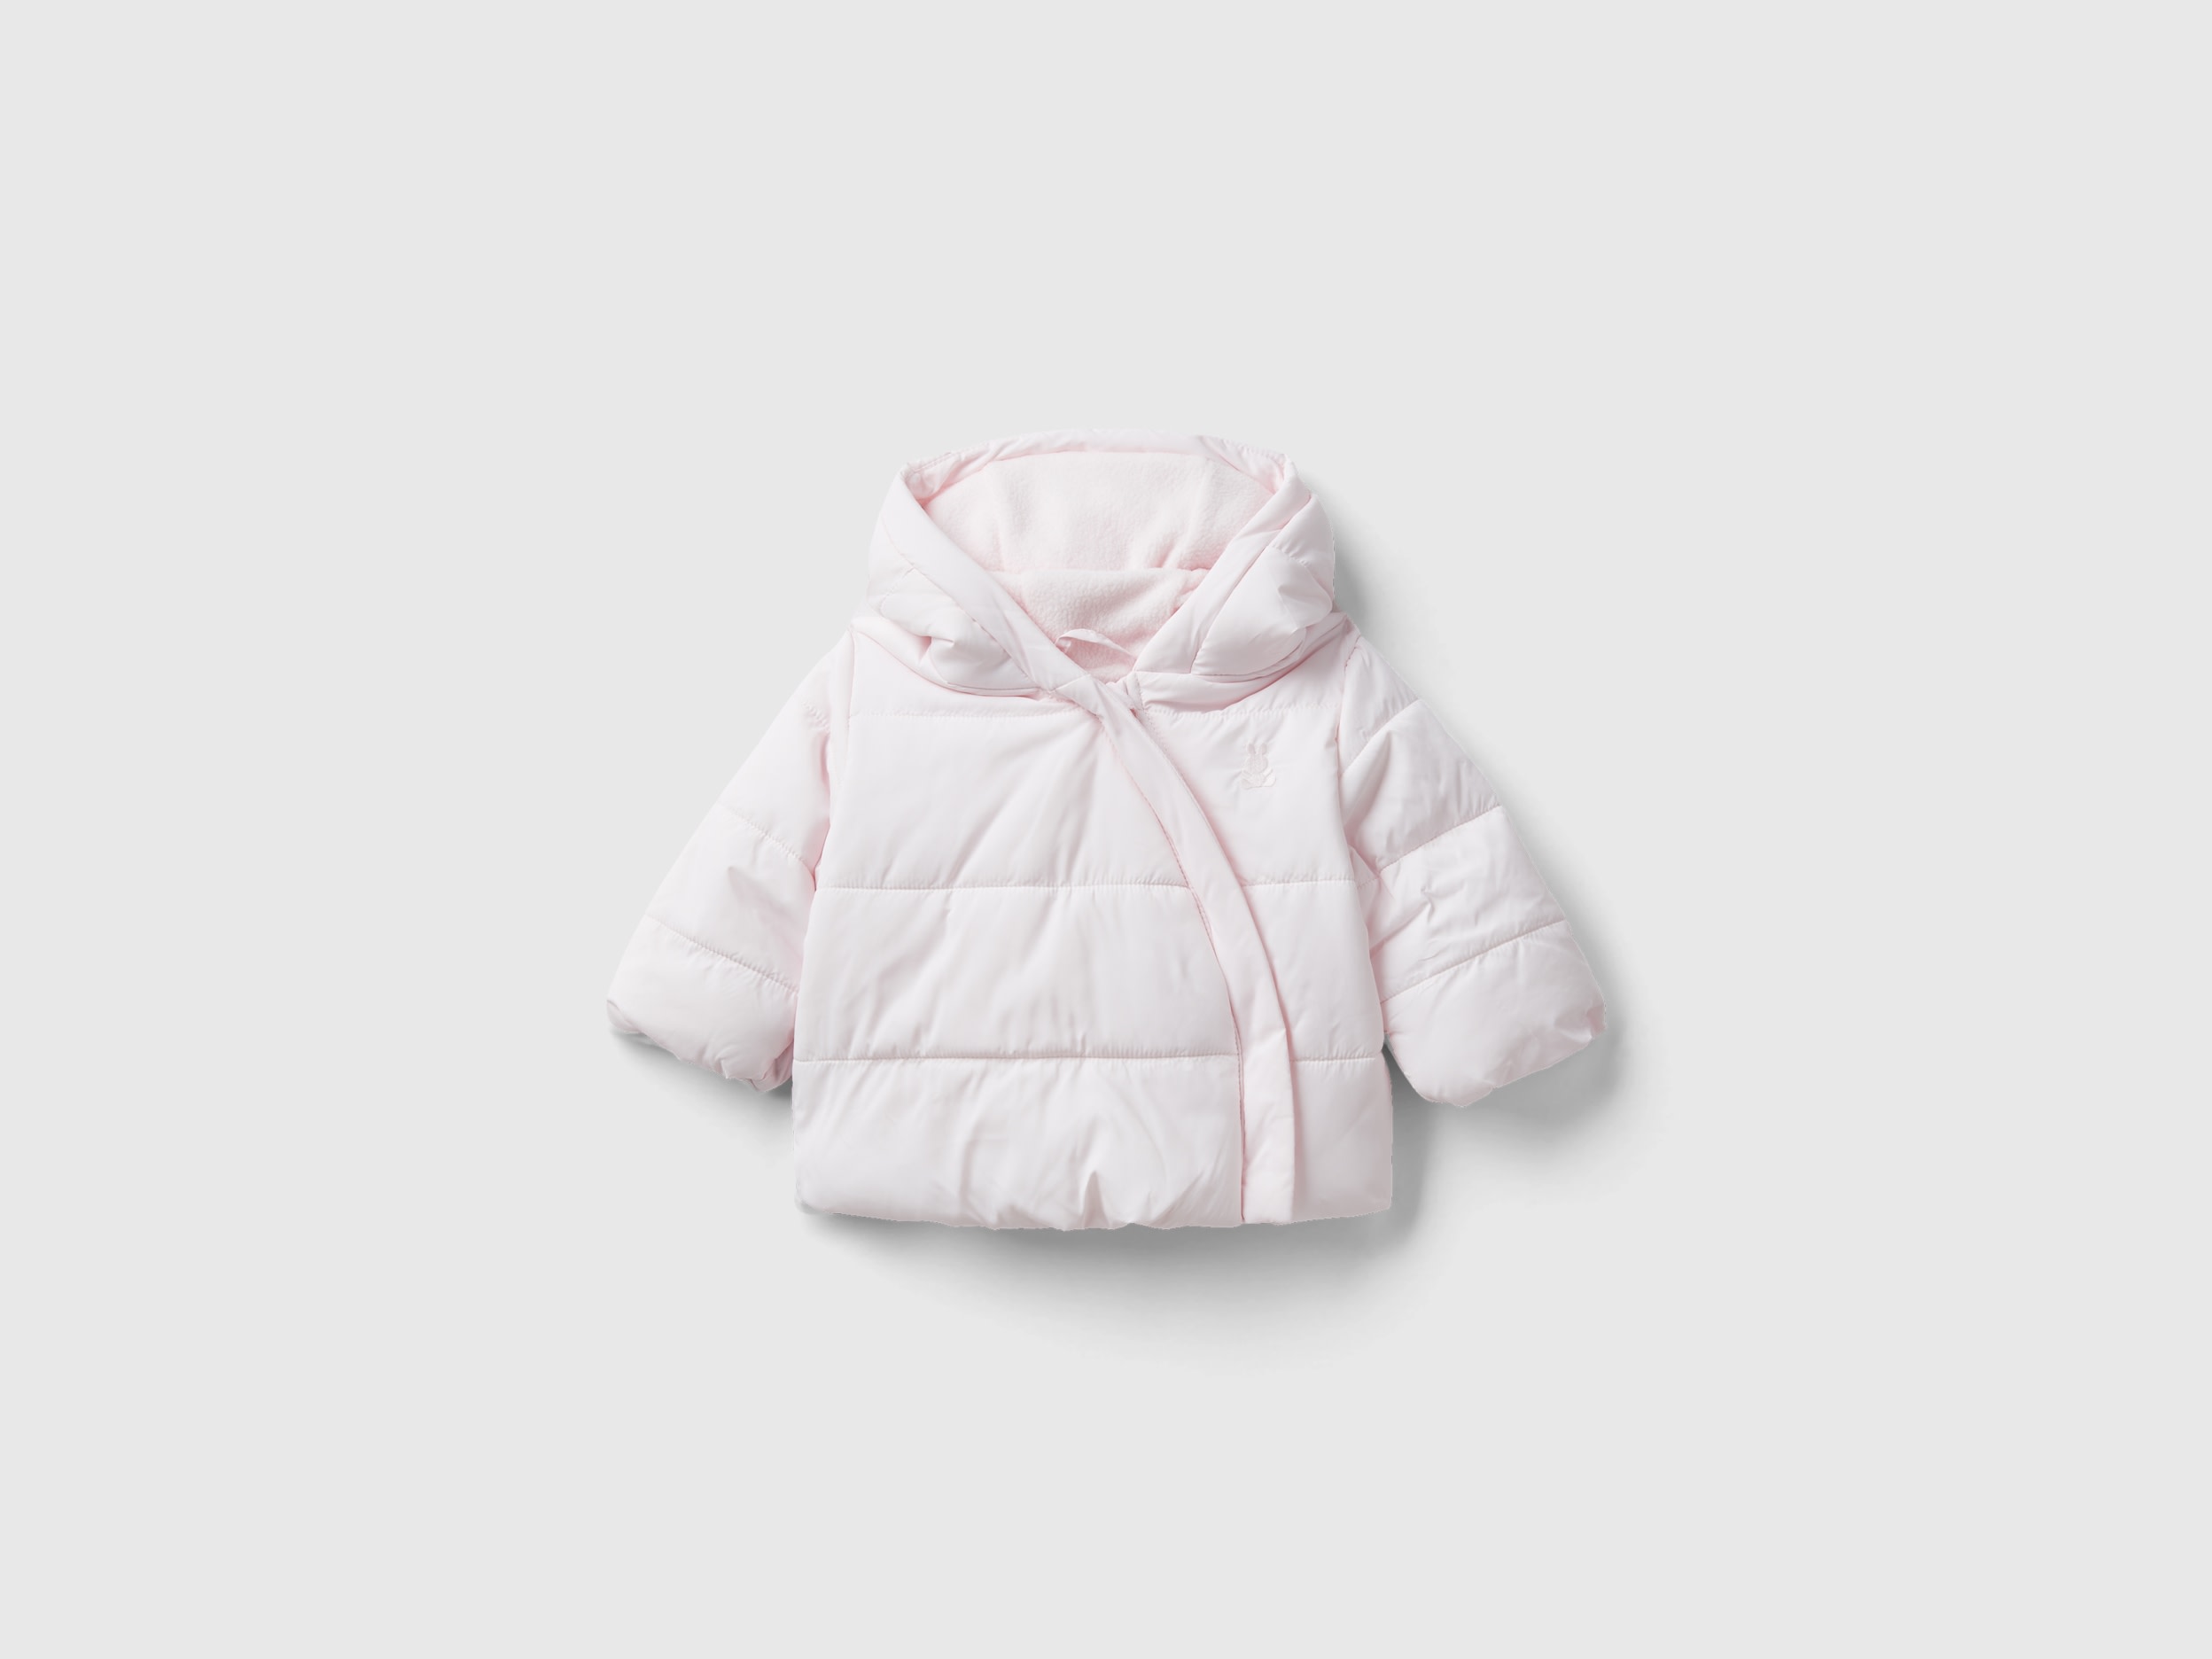 Benetton, Padded Jacket With Hood, size 9-12, Soft Pink, Kids